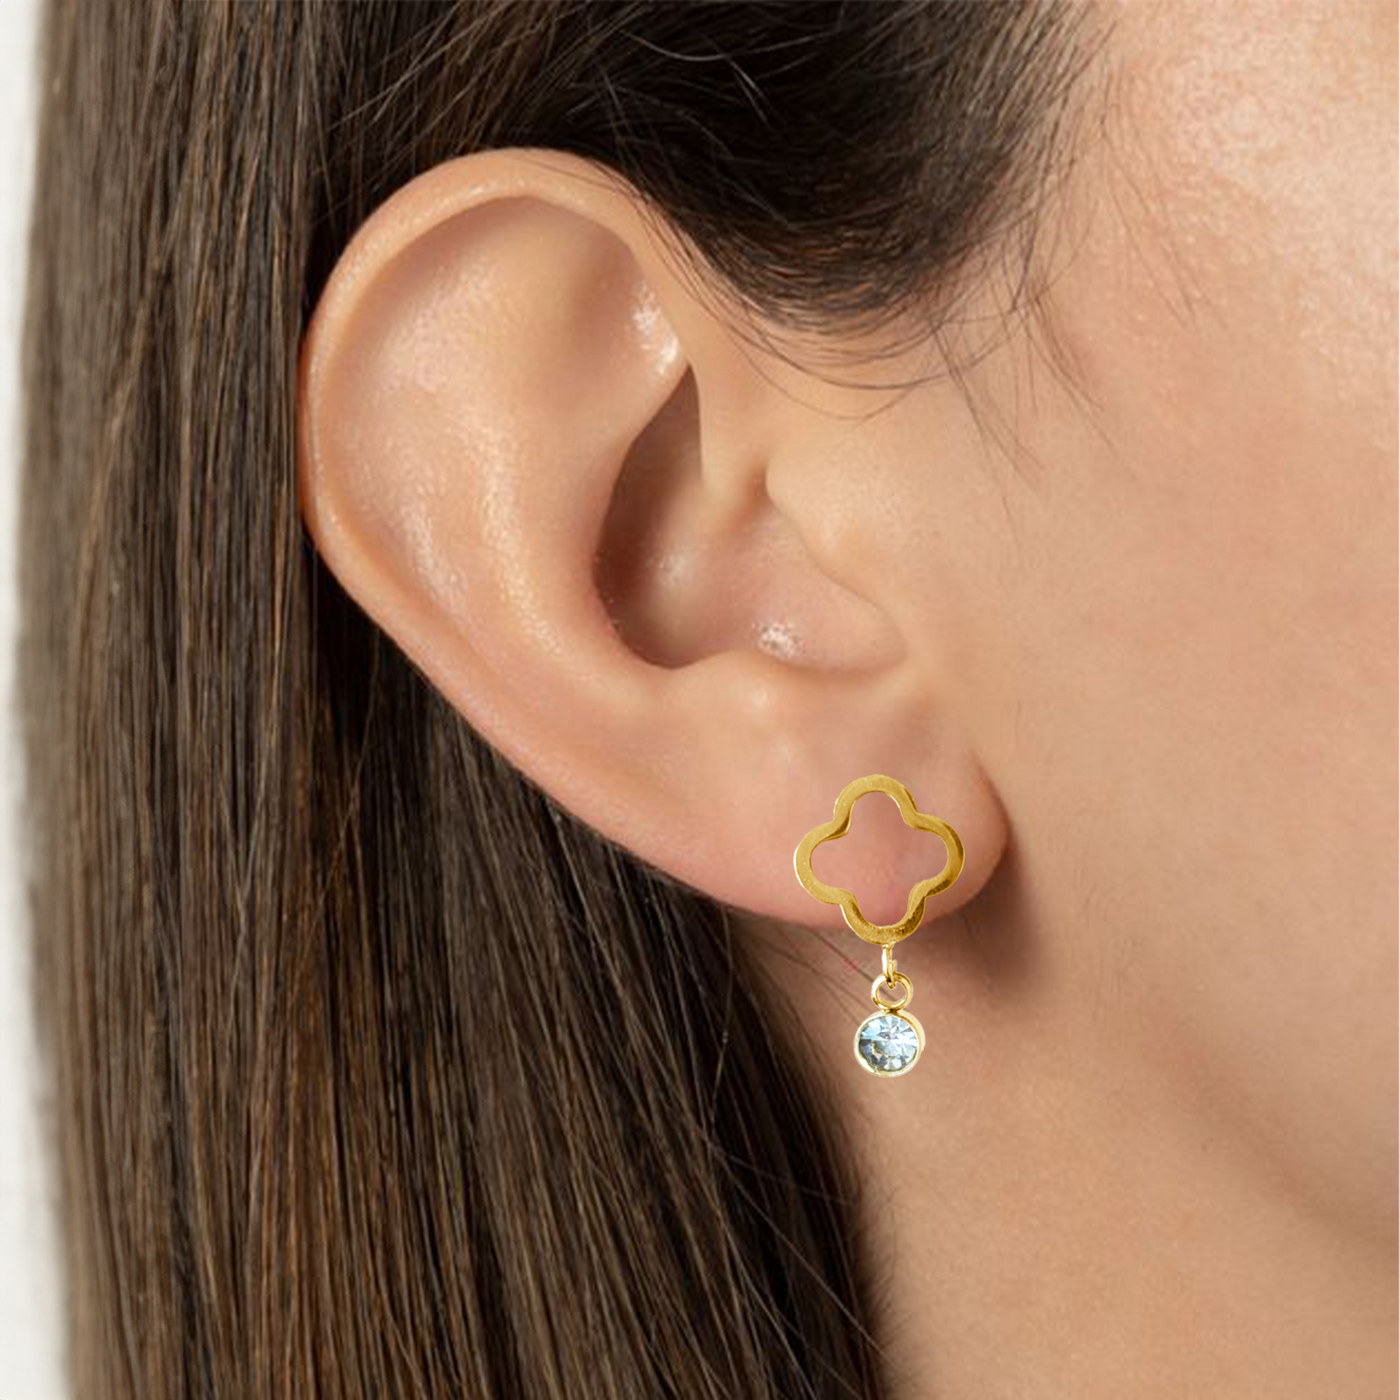 Lucky Clover Leaf Earrings - Set of 3 - Gold Tone